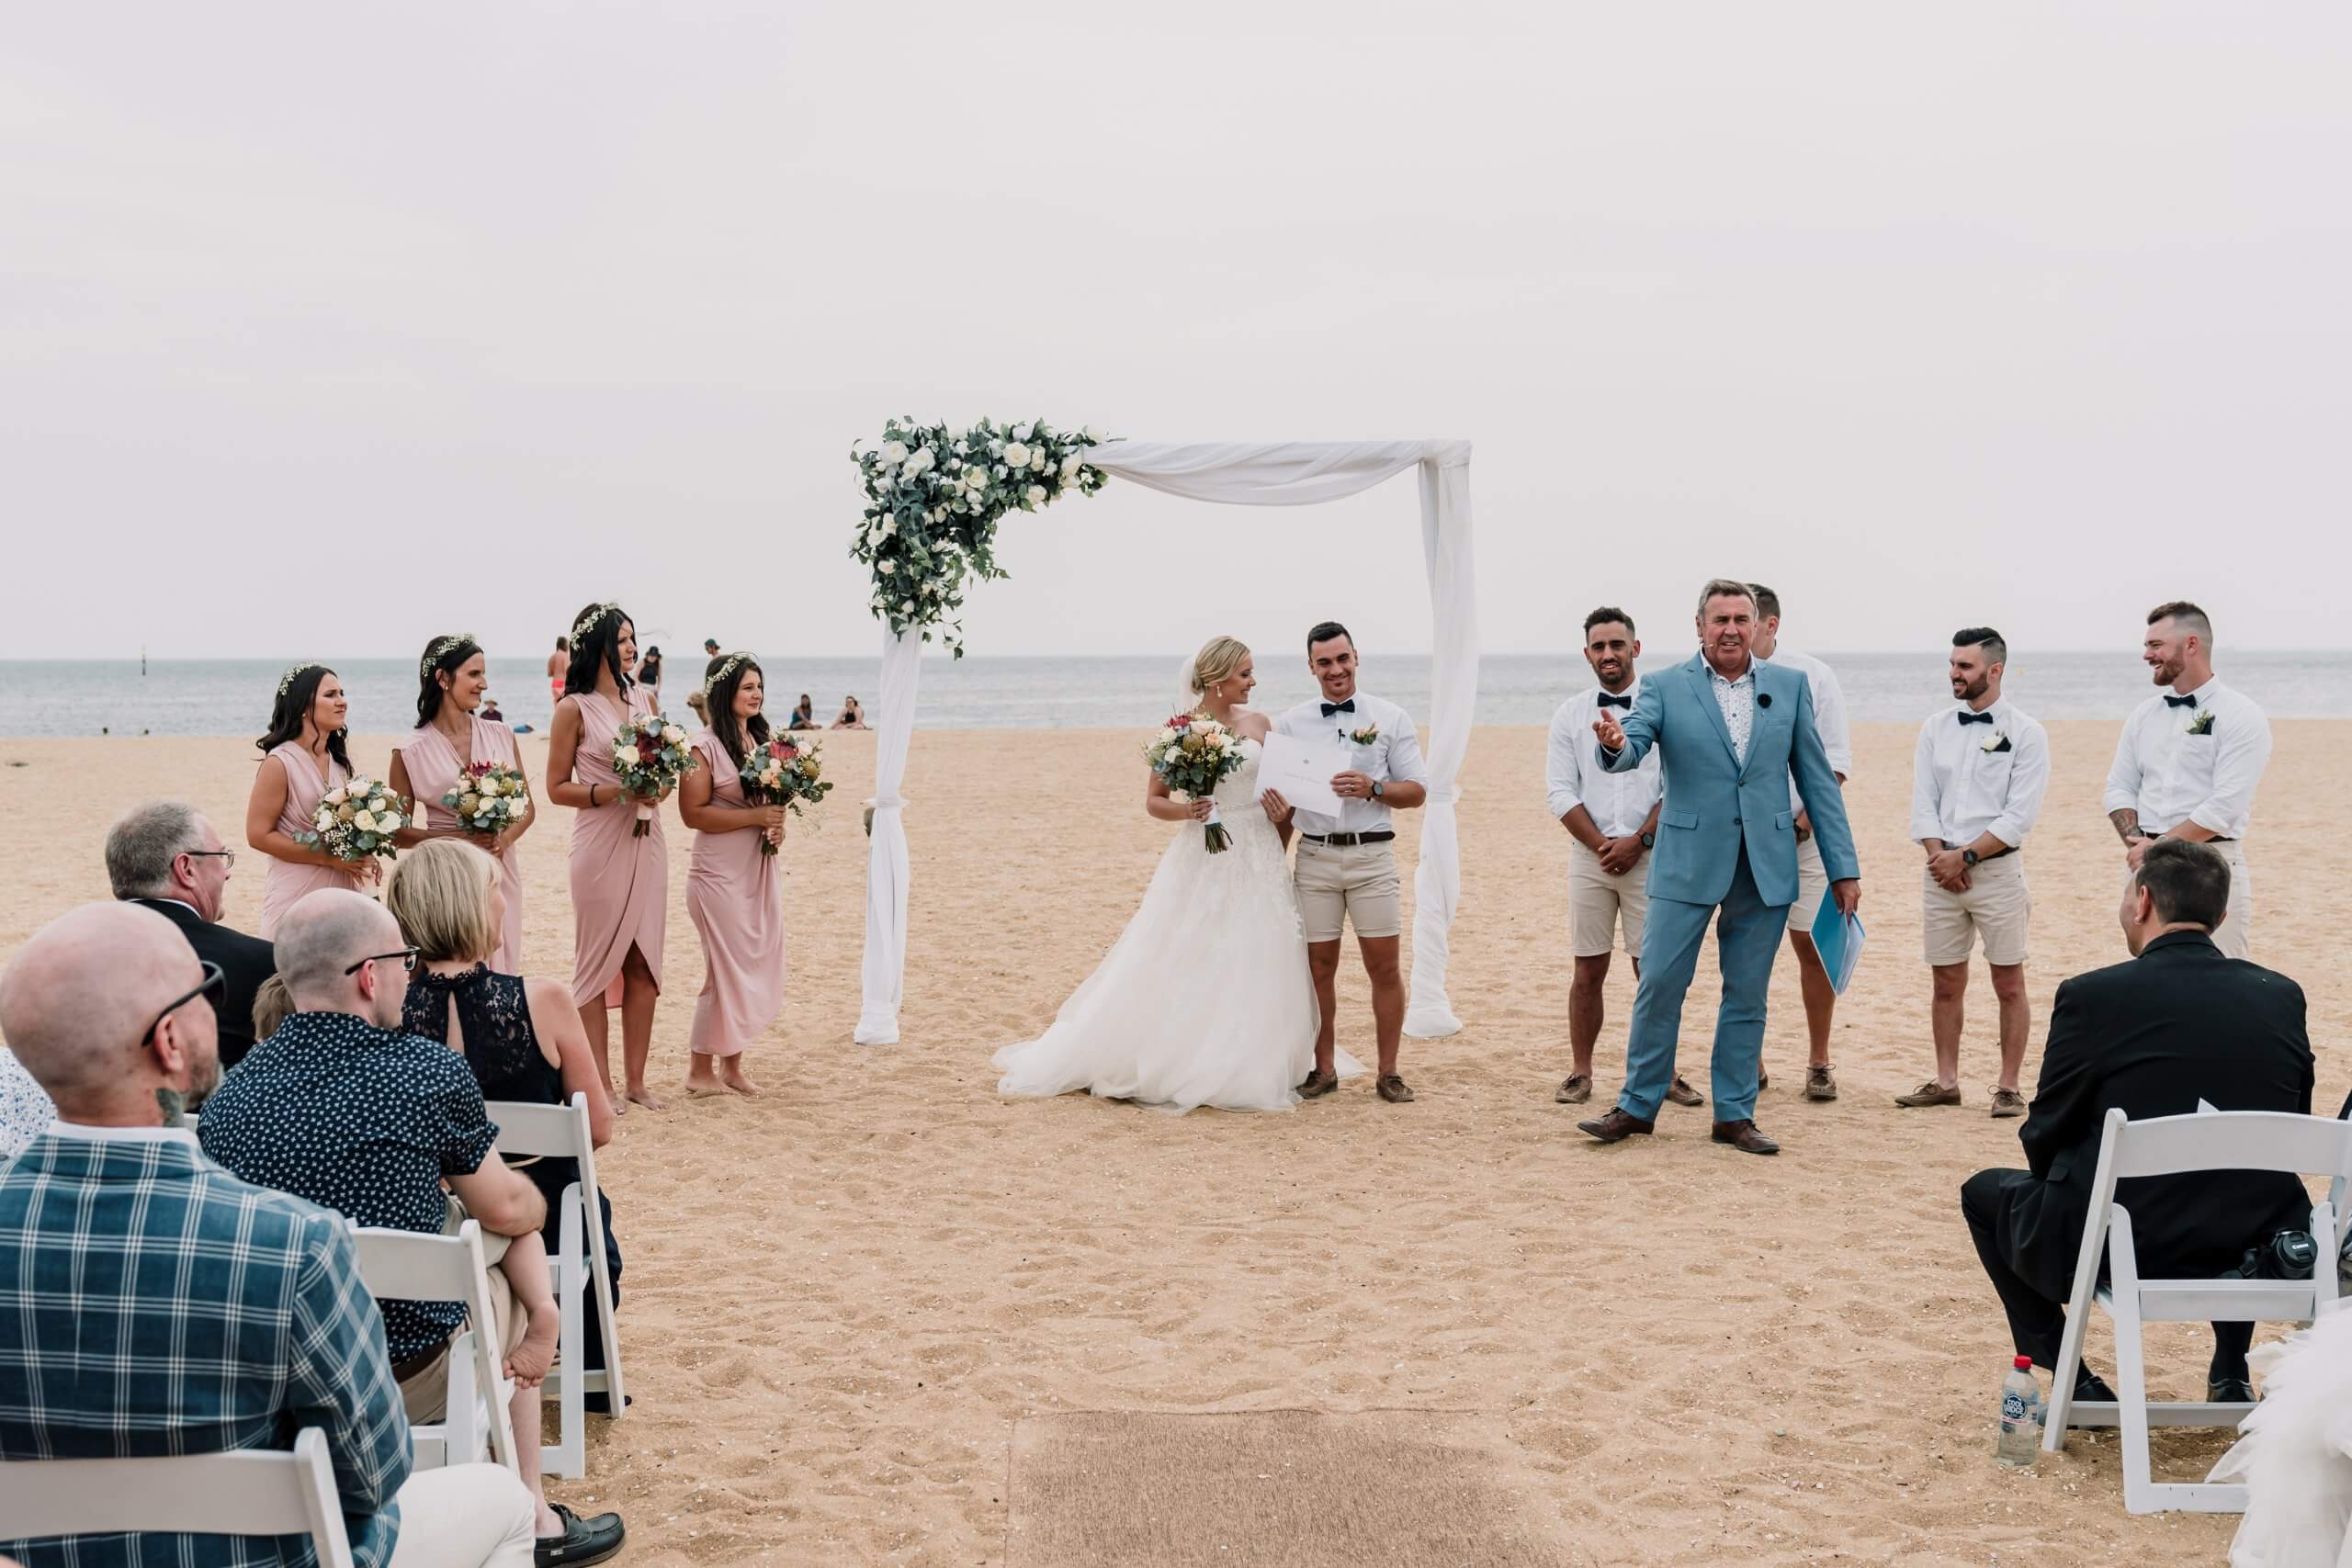 Beautiful beach wedding captured by Black Avenue Productions